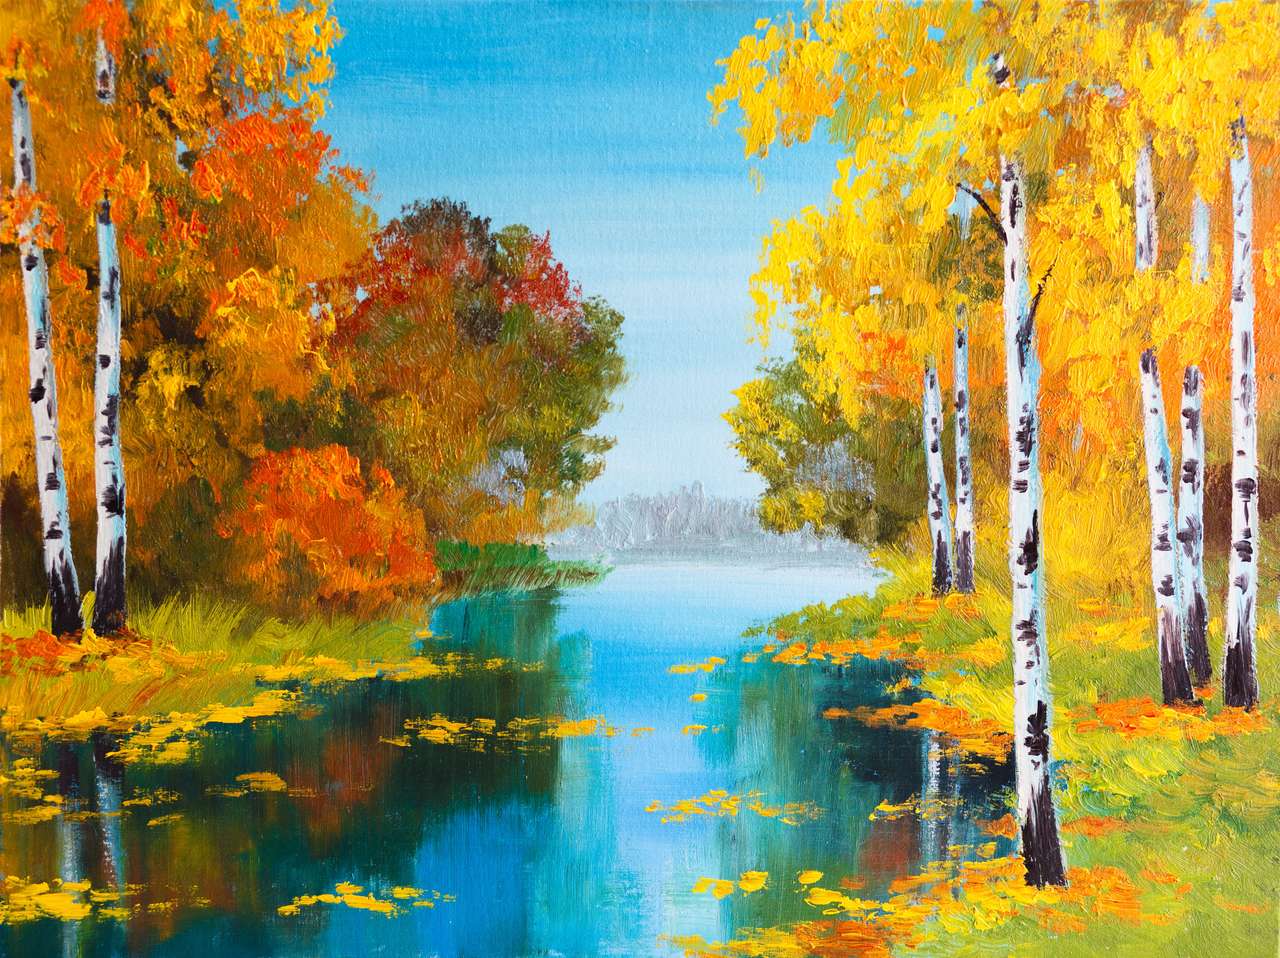 birch forest near the river puzzle online from photo